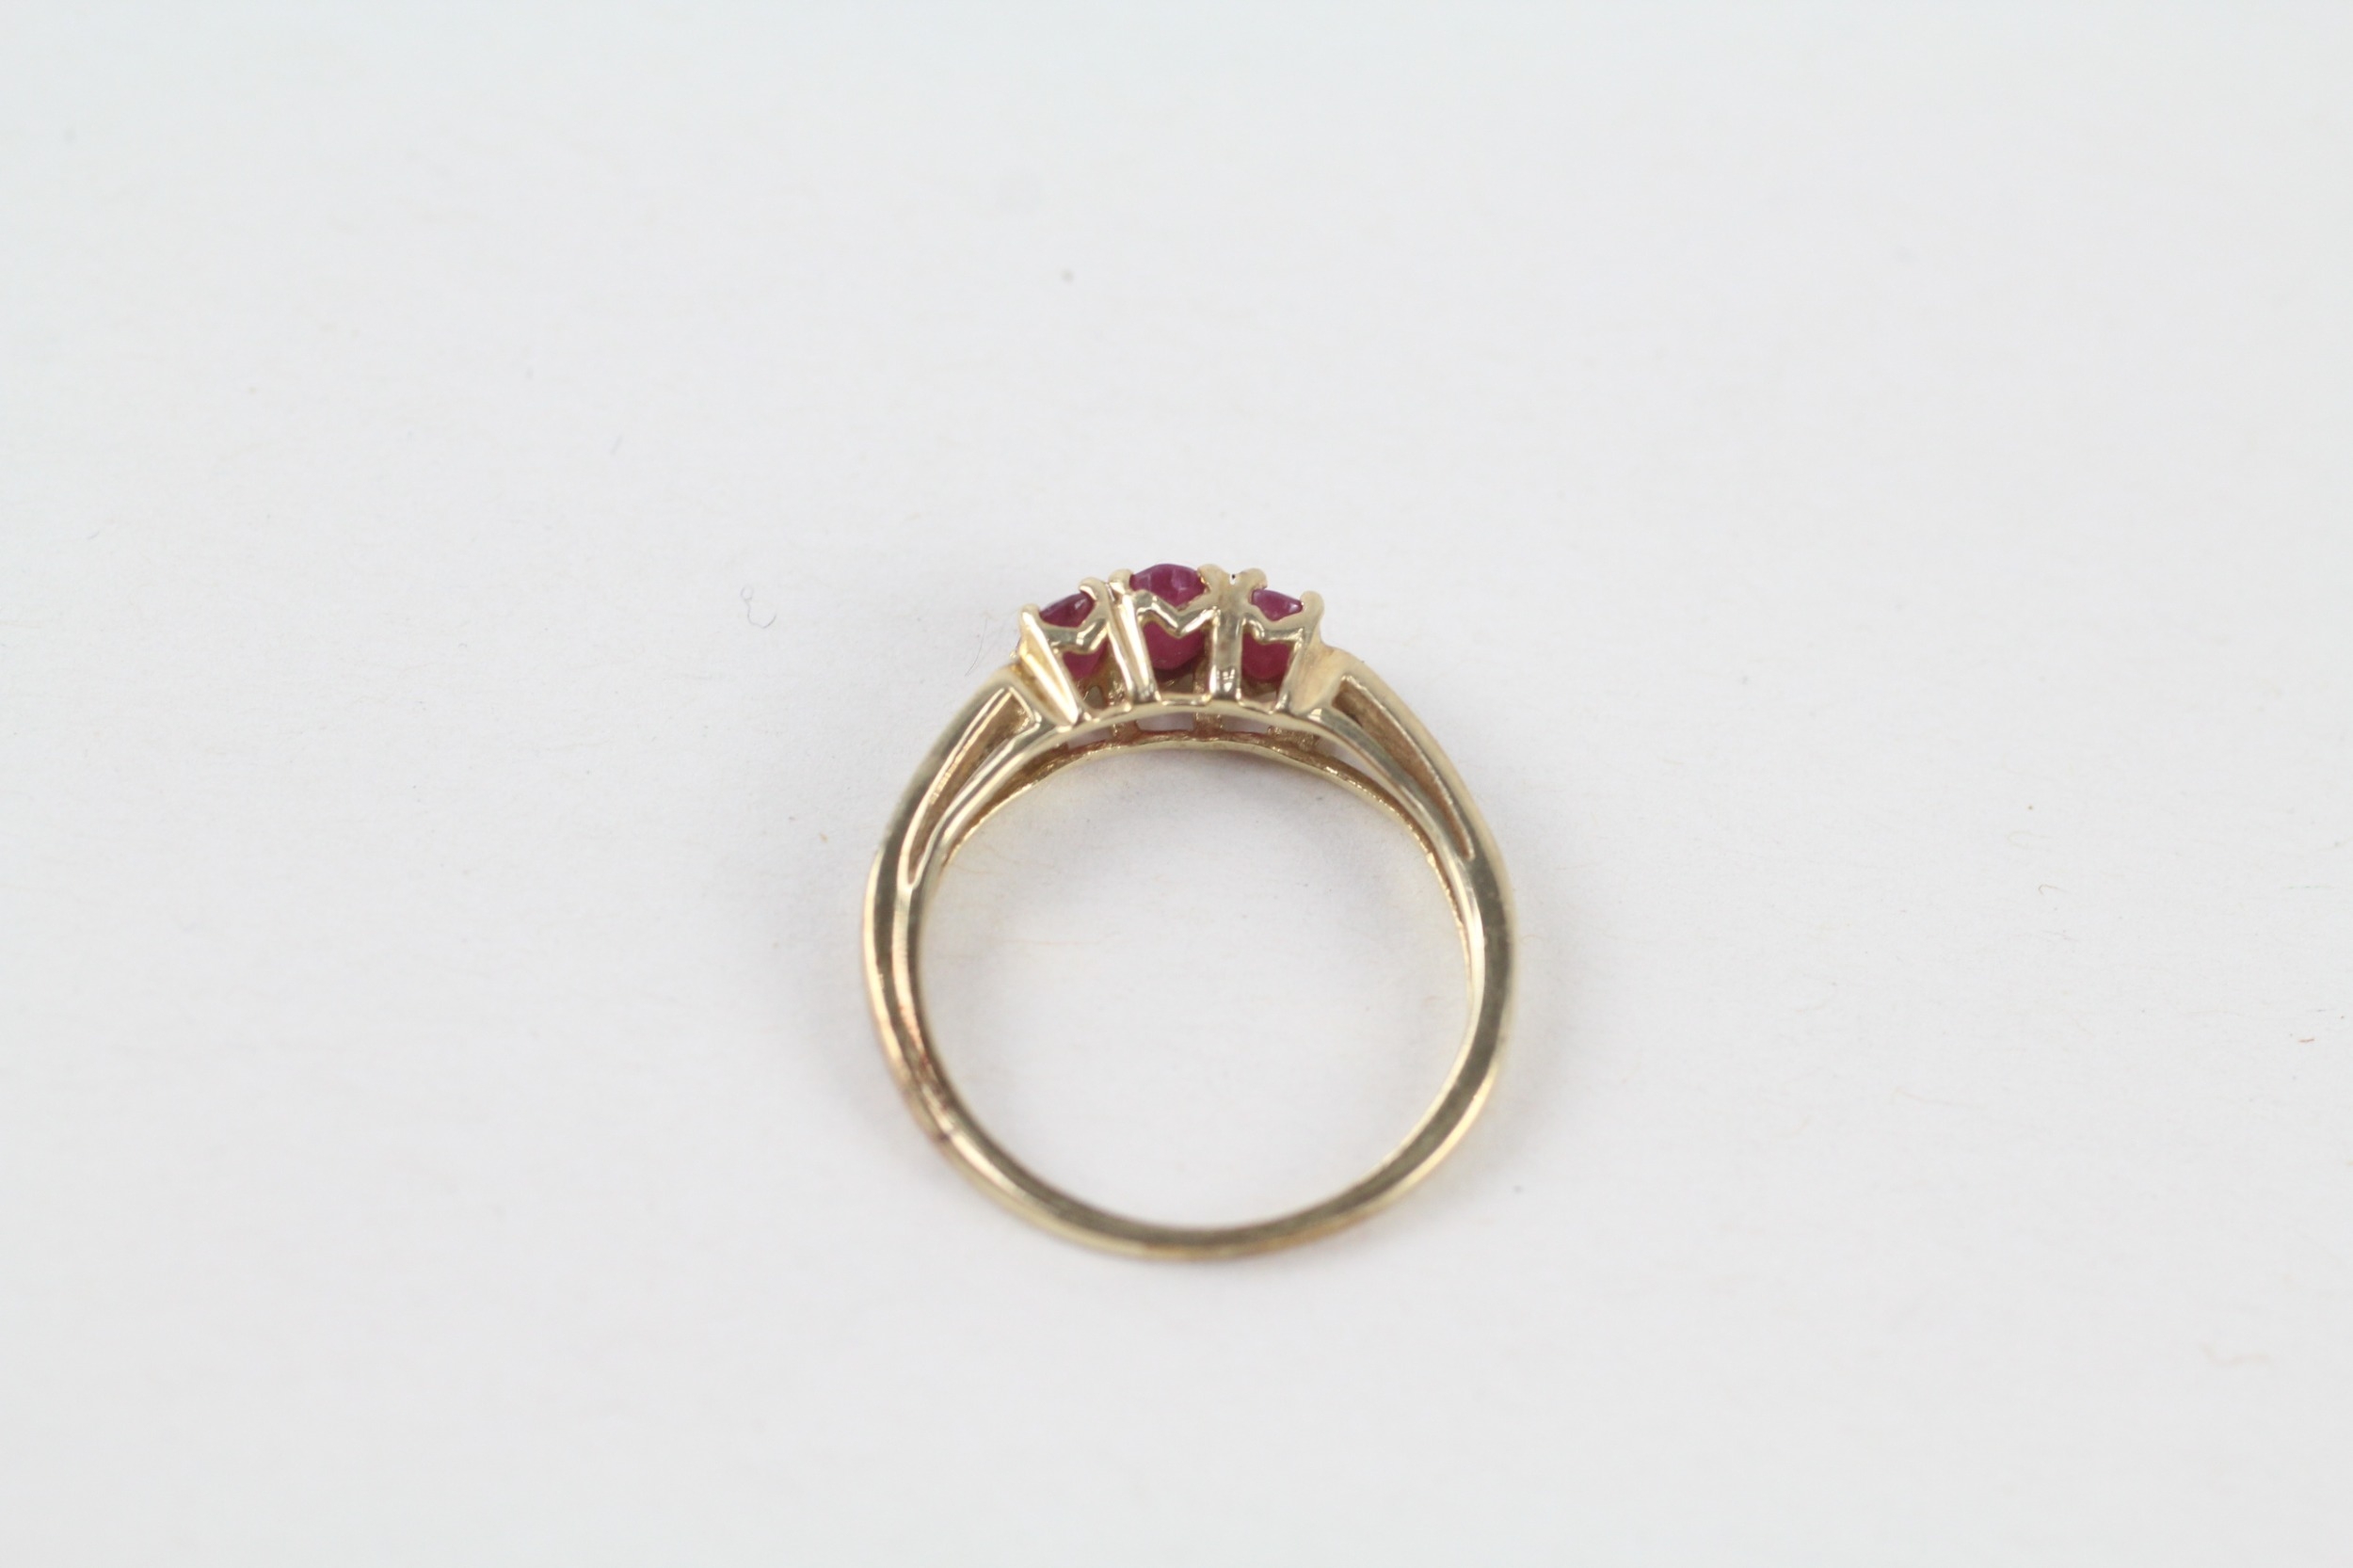 9ct gold oval cut ruby & diamond ring (1.7g) - Image 4 of 4